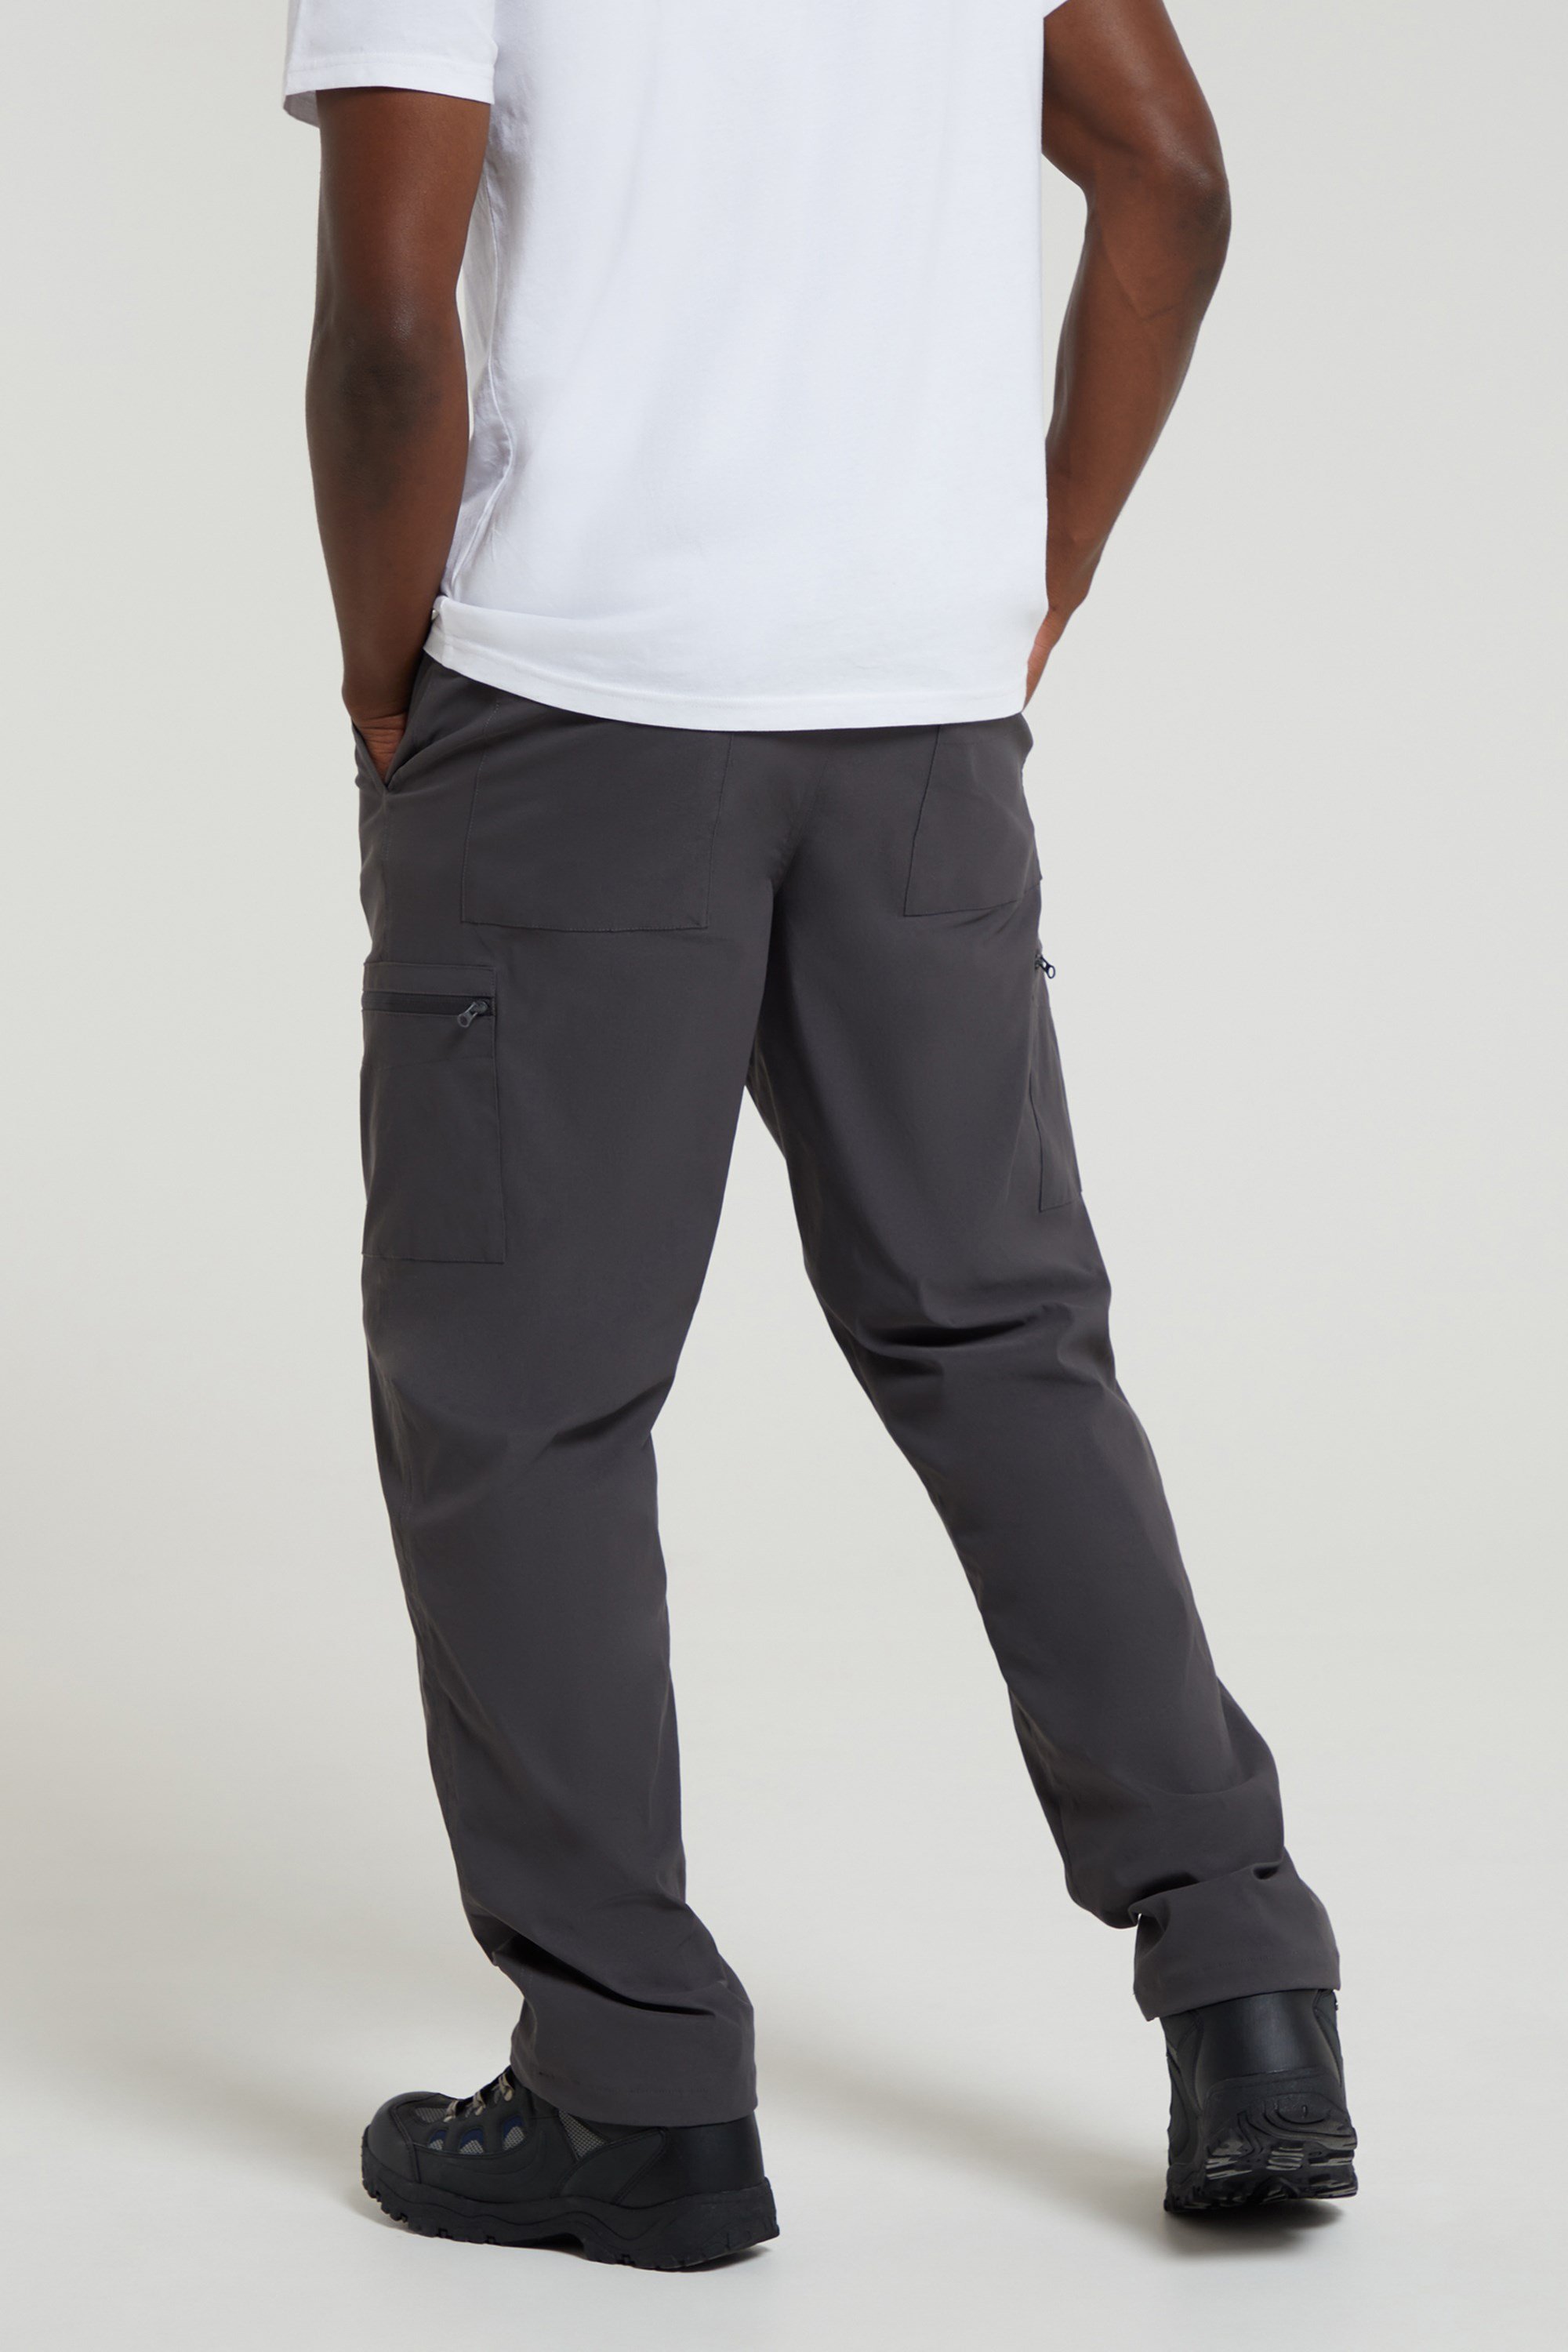 Buy Mountain Warehouse Grey Merino Thermal Pants with Fly - Mens from Next  Hungary